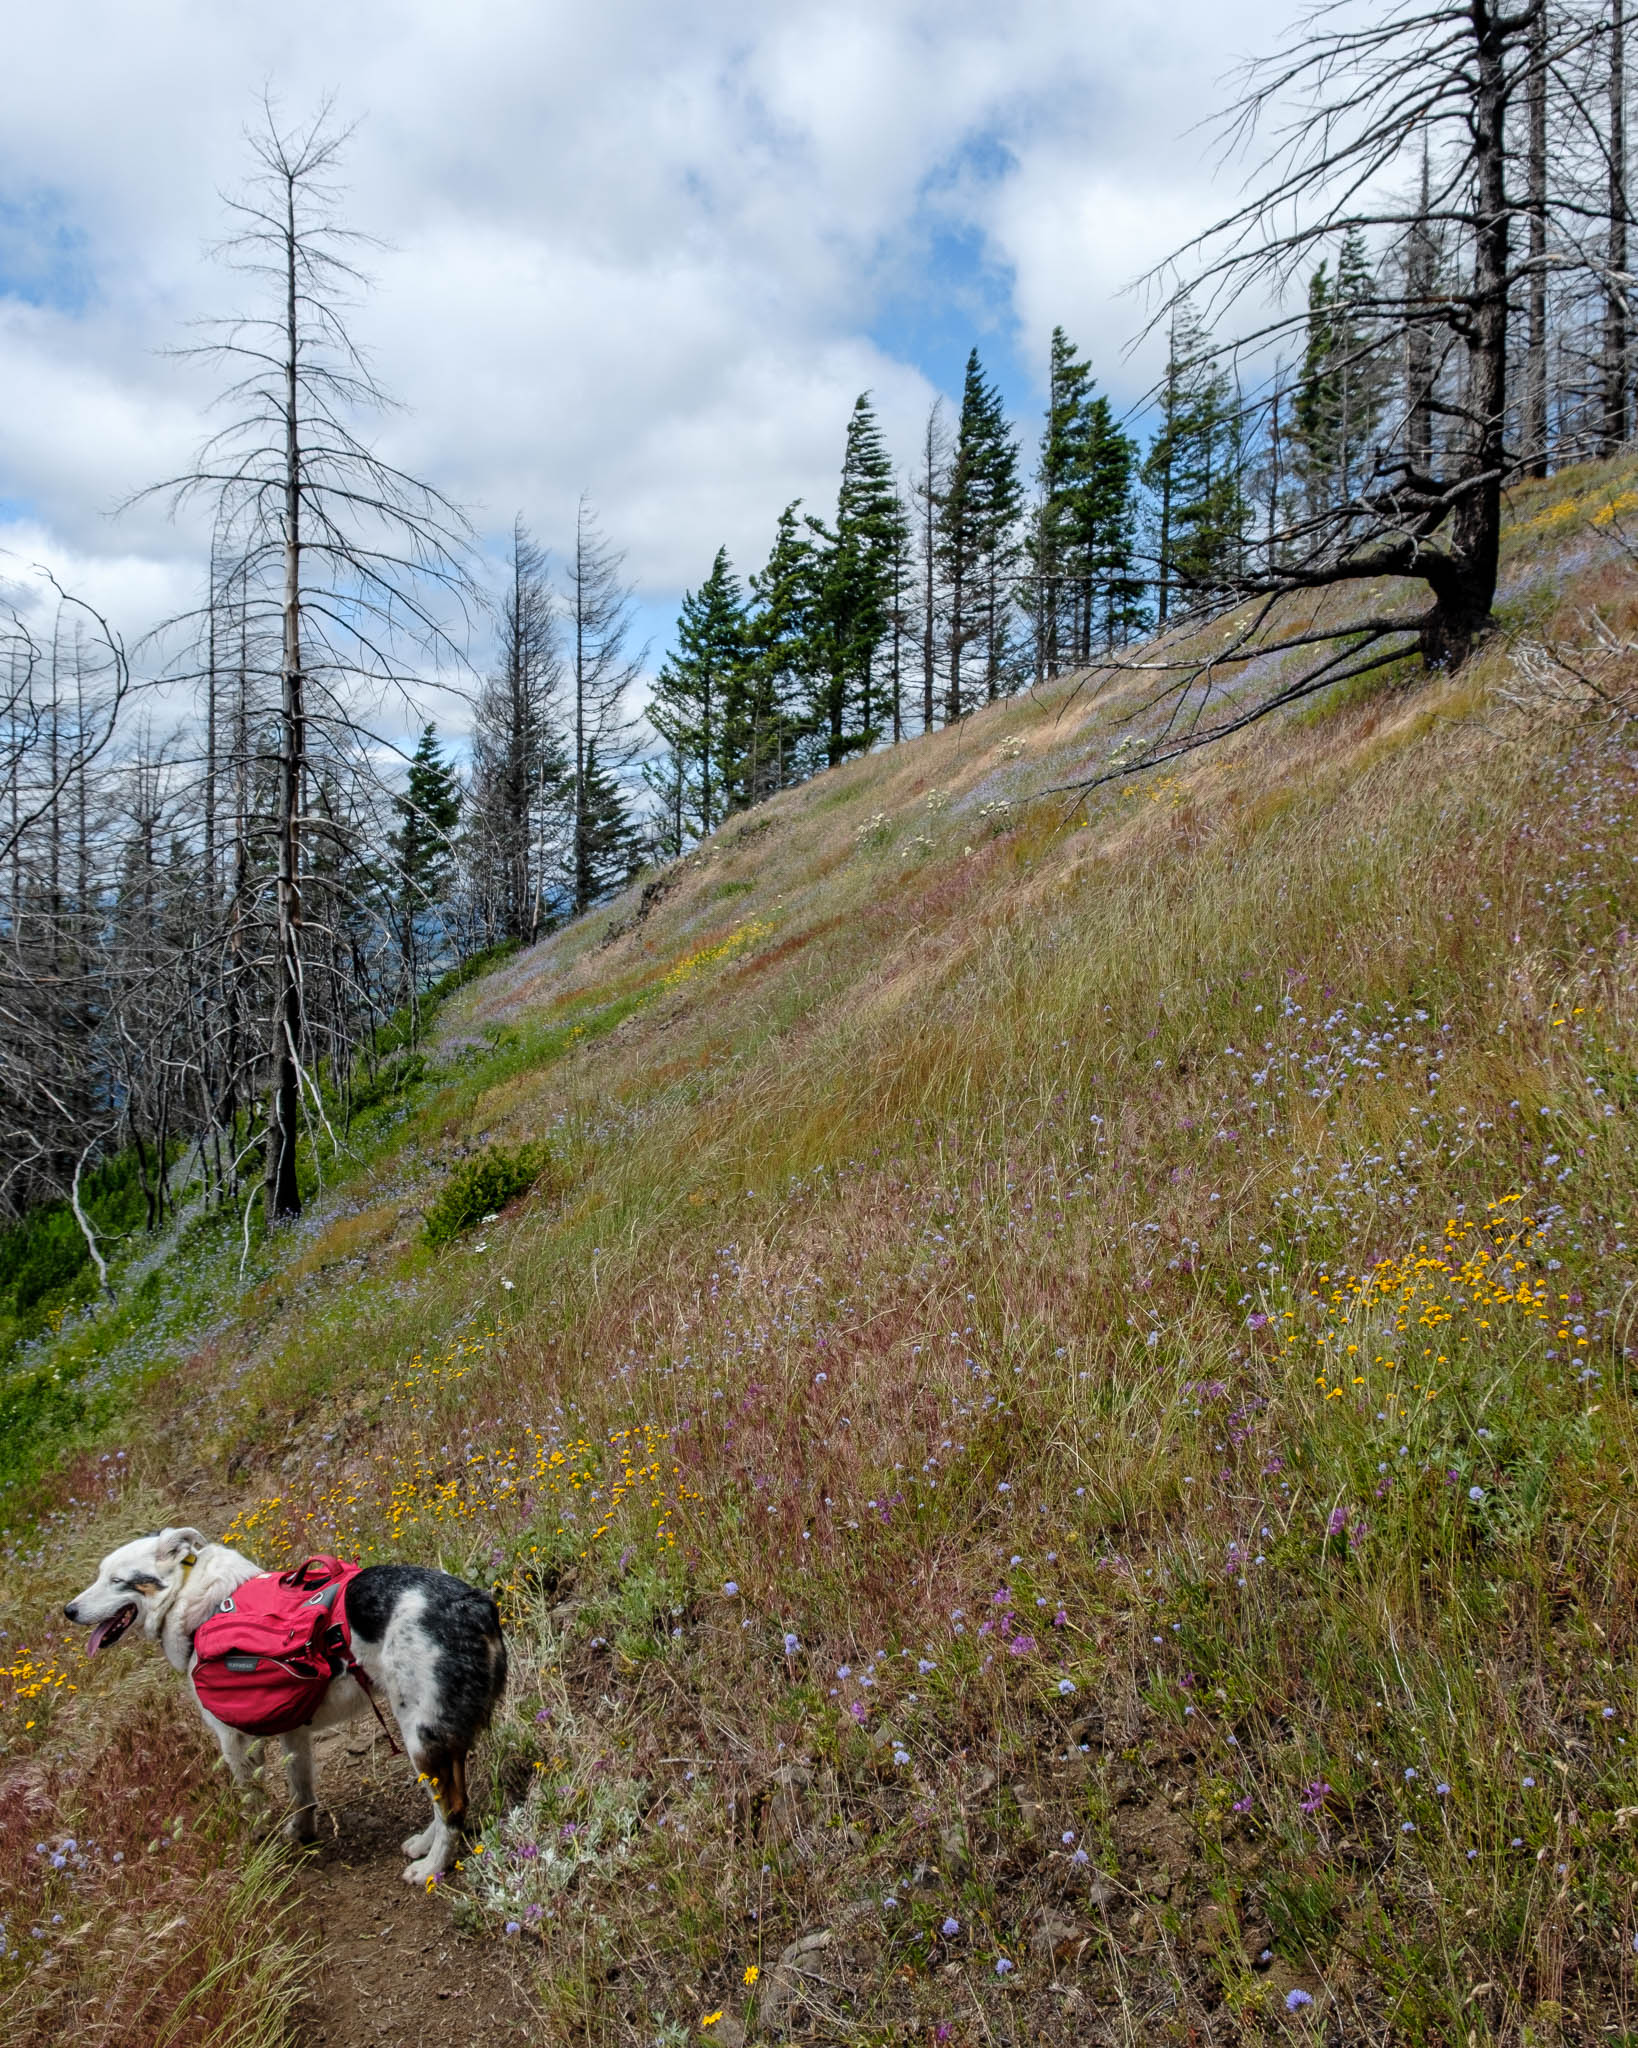 Reef and smiles while looking back up the creek drainage we have almost completed our descent of. The background is a hillside littered with multicolored wildflowers blowing in the wind.